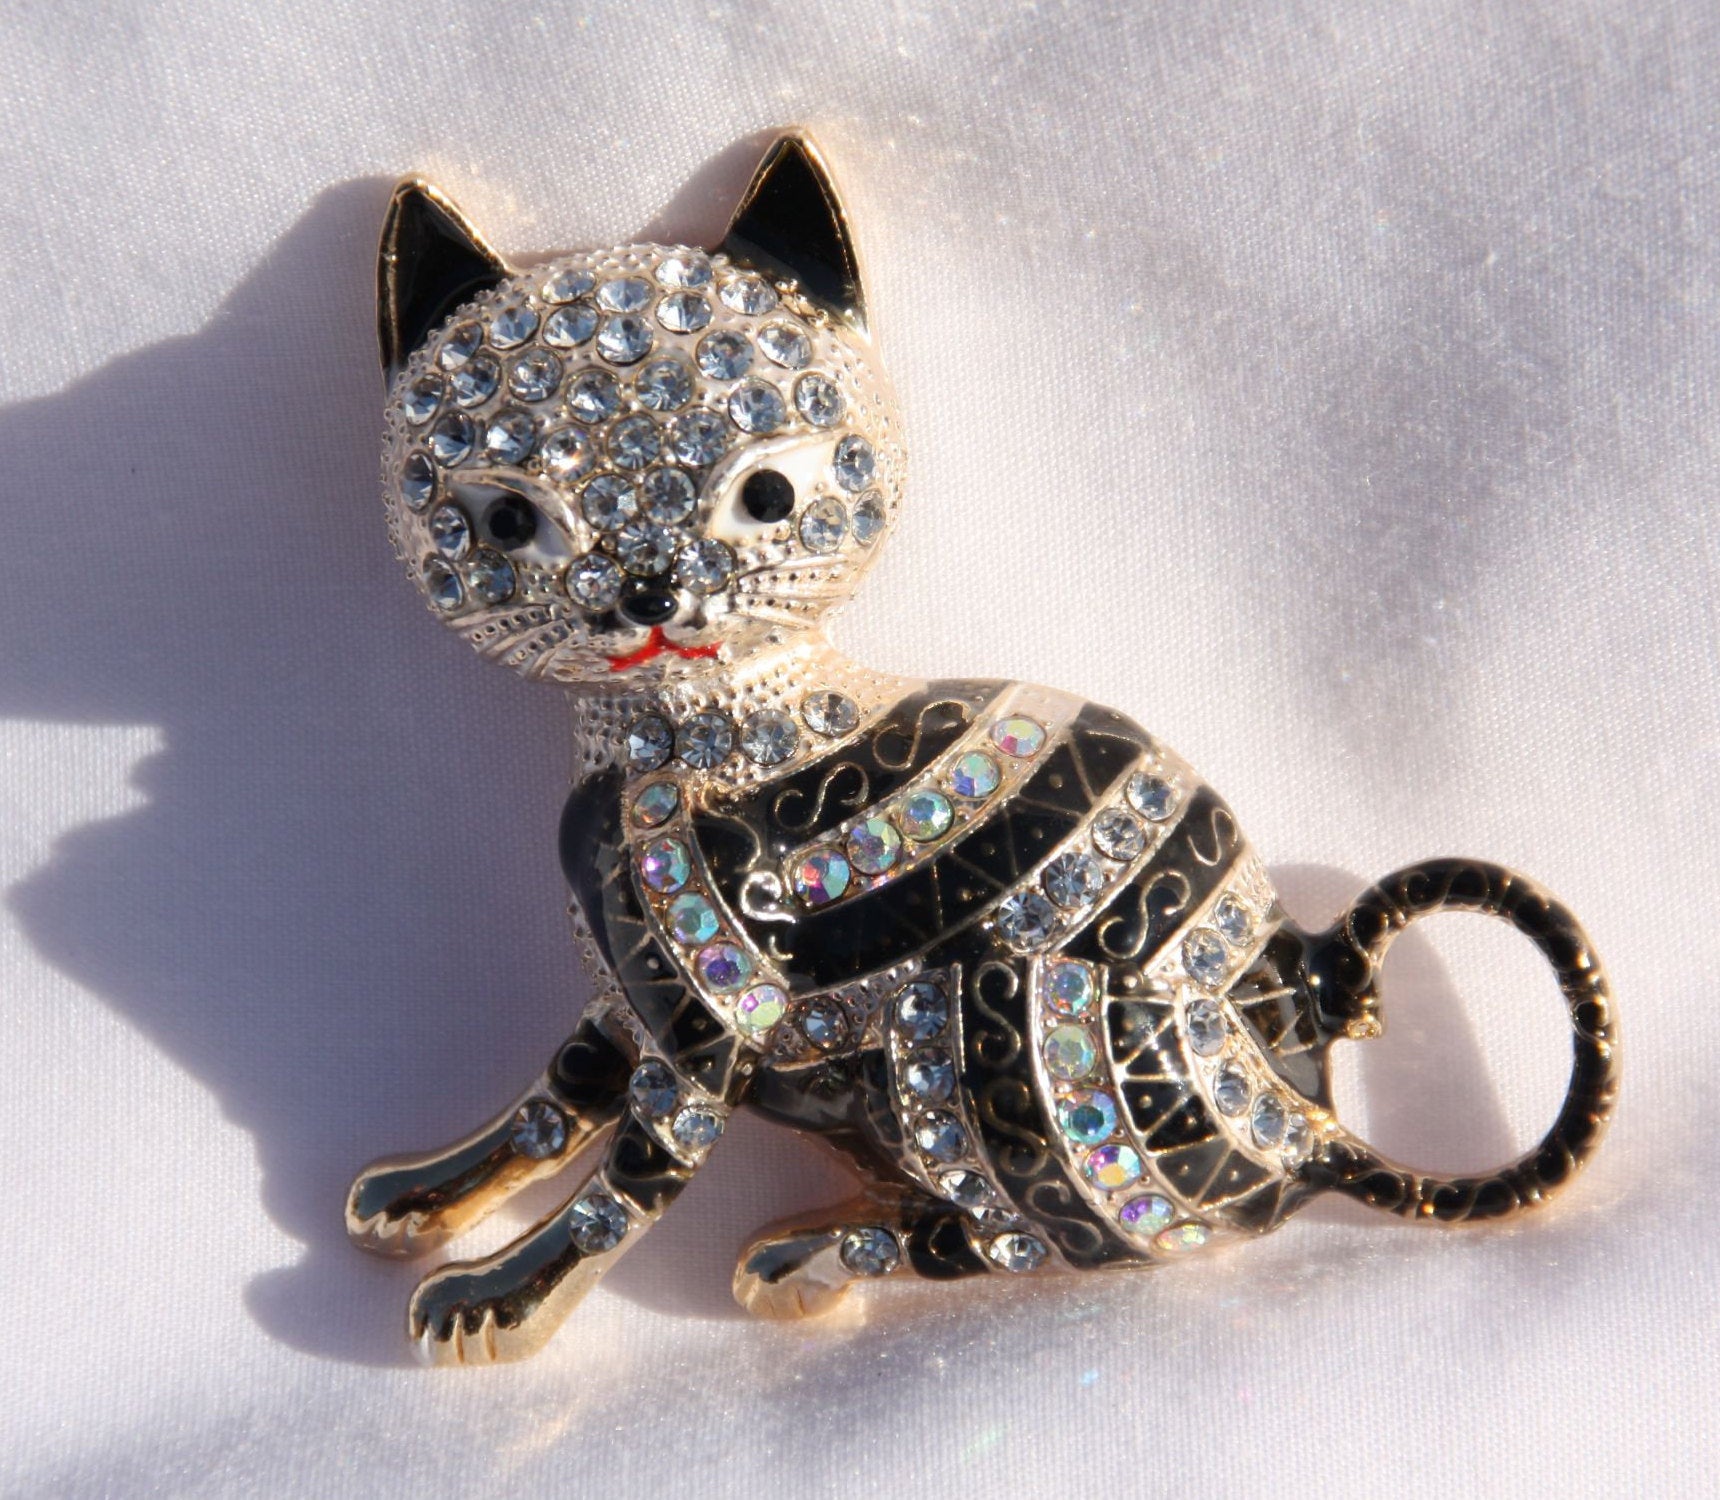 Coverminder Rhinestone Mama and Baby Cat Cover Minder Needleminder Needle Minder